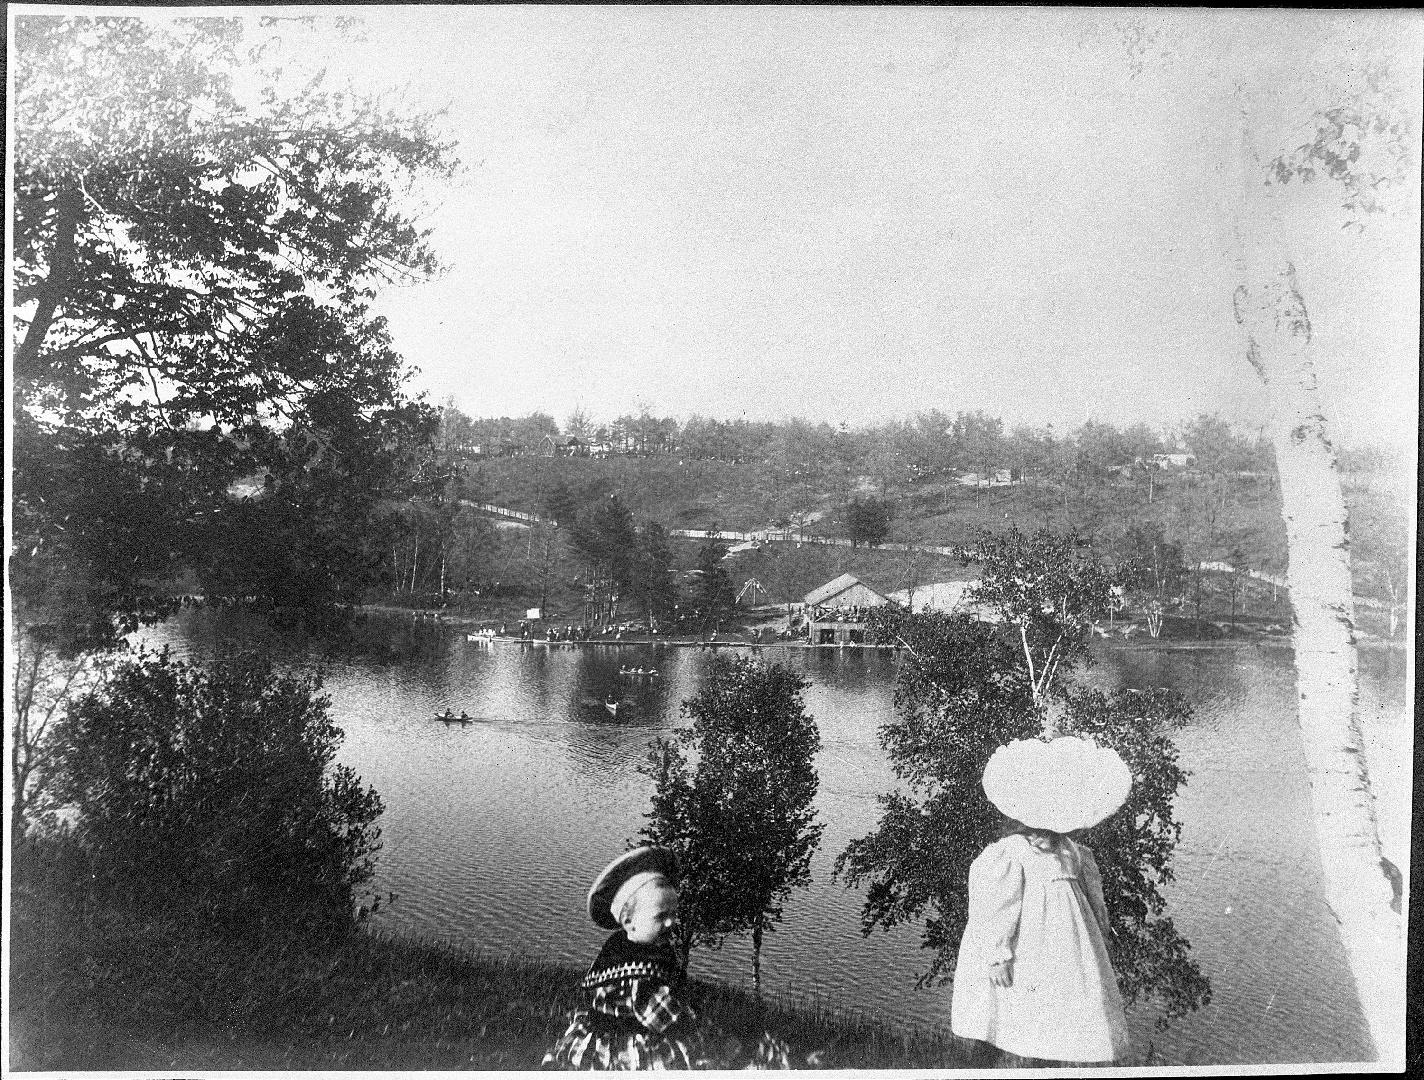 HIGH PARK, Grenadier Pond, looking east from west bank, showing boat-house on east bank